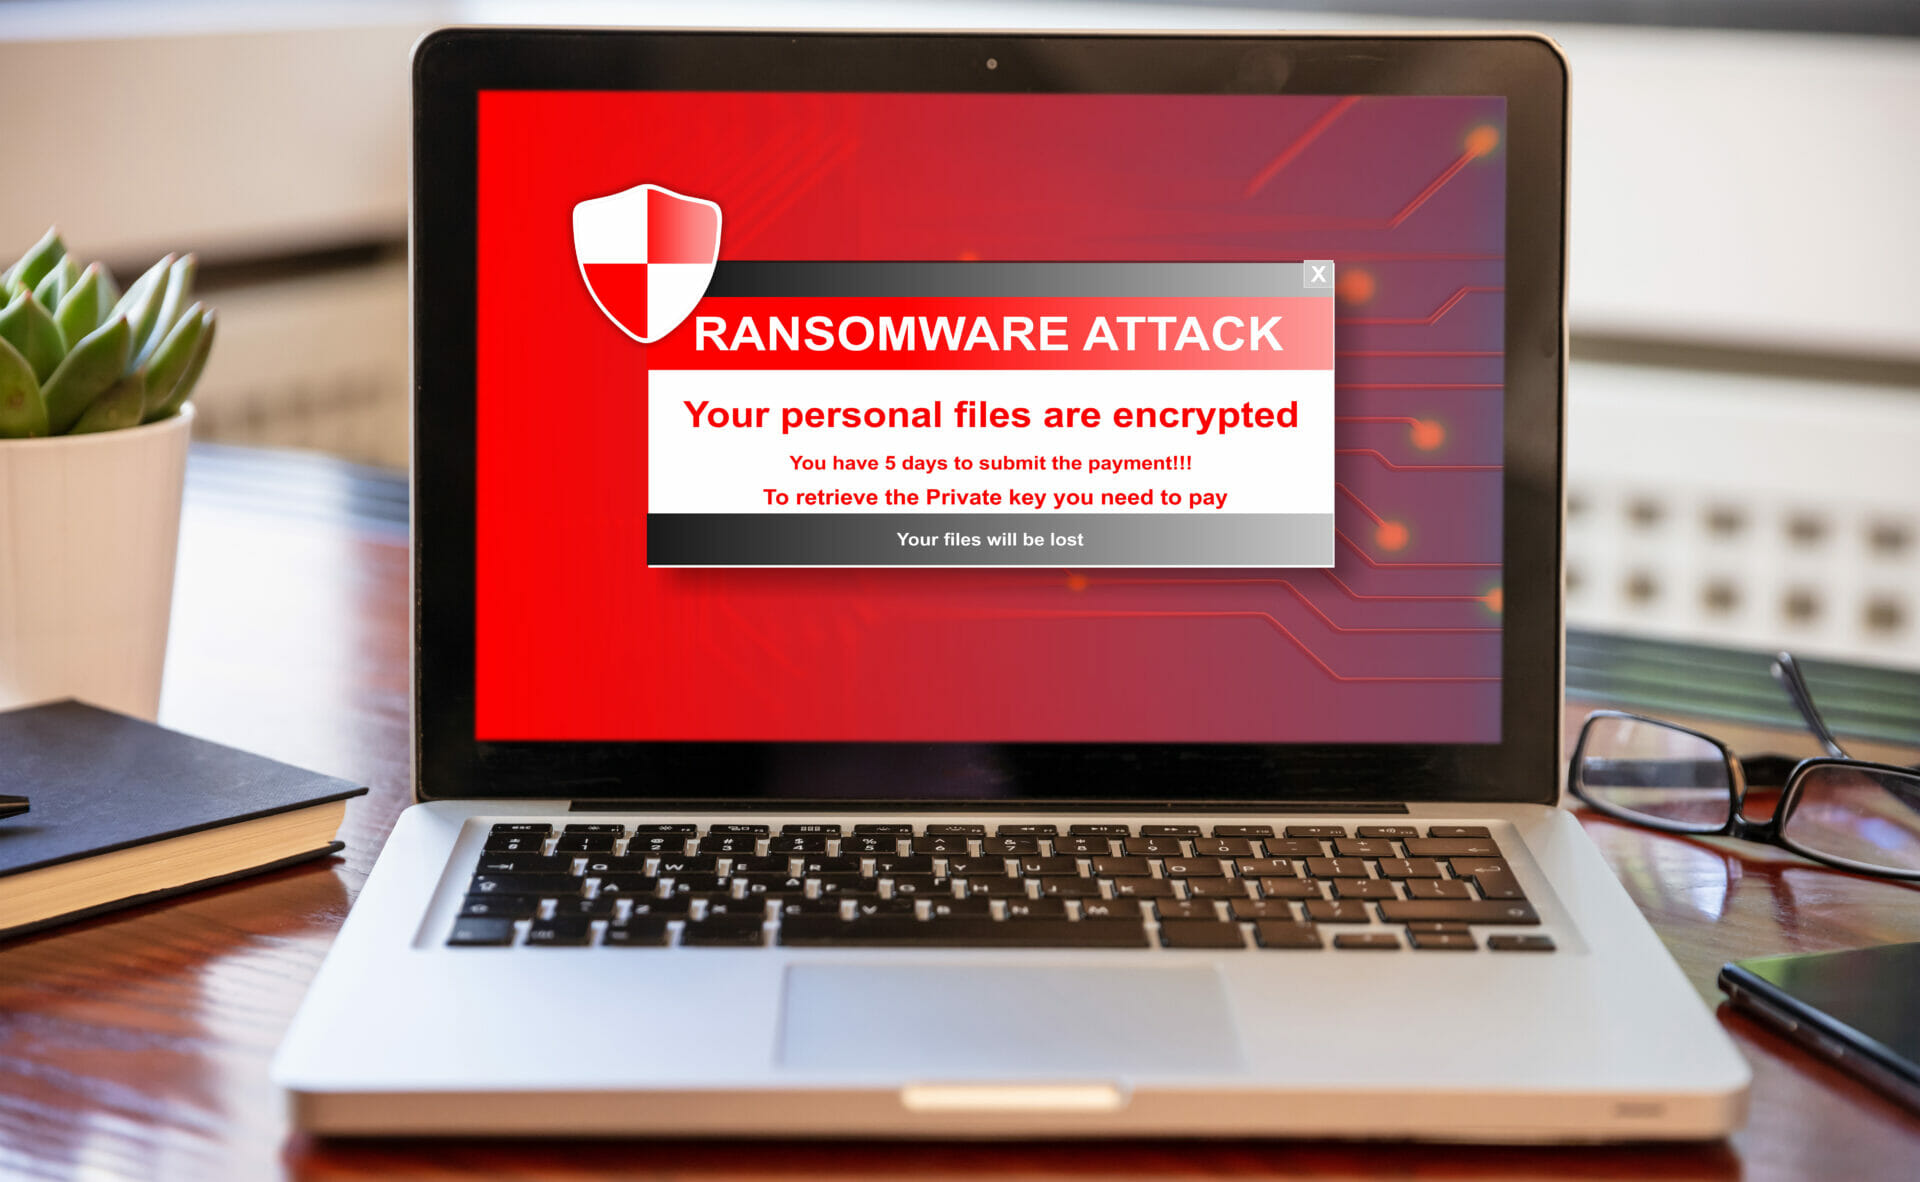 SECURITY ALERT: Cyber Criminals mailing out USB Drives that install Ransomware